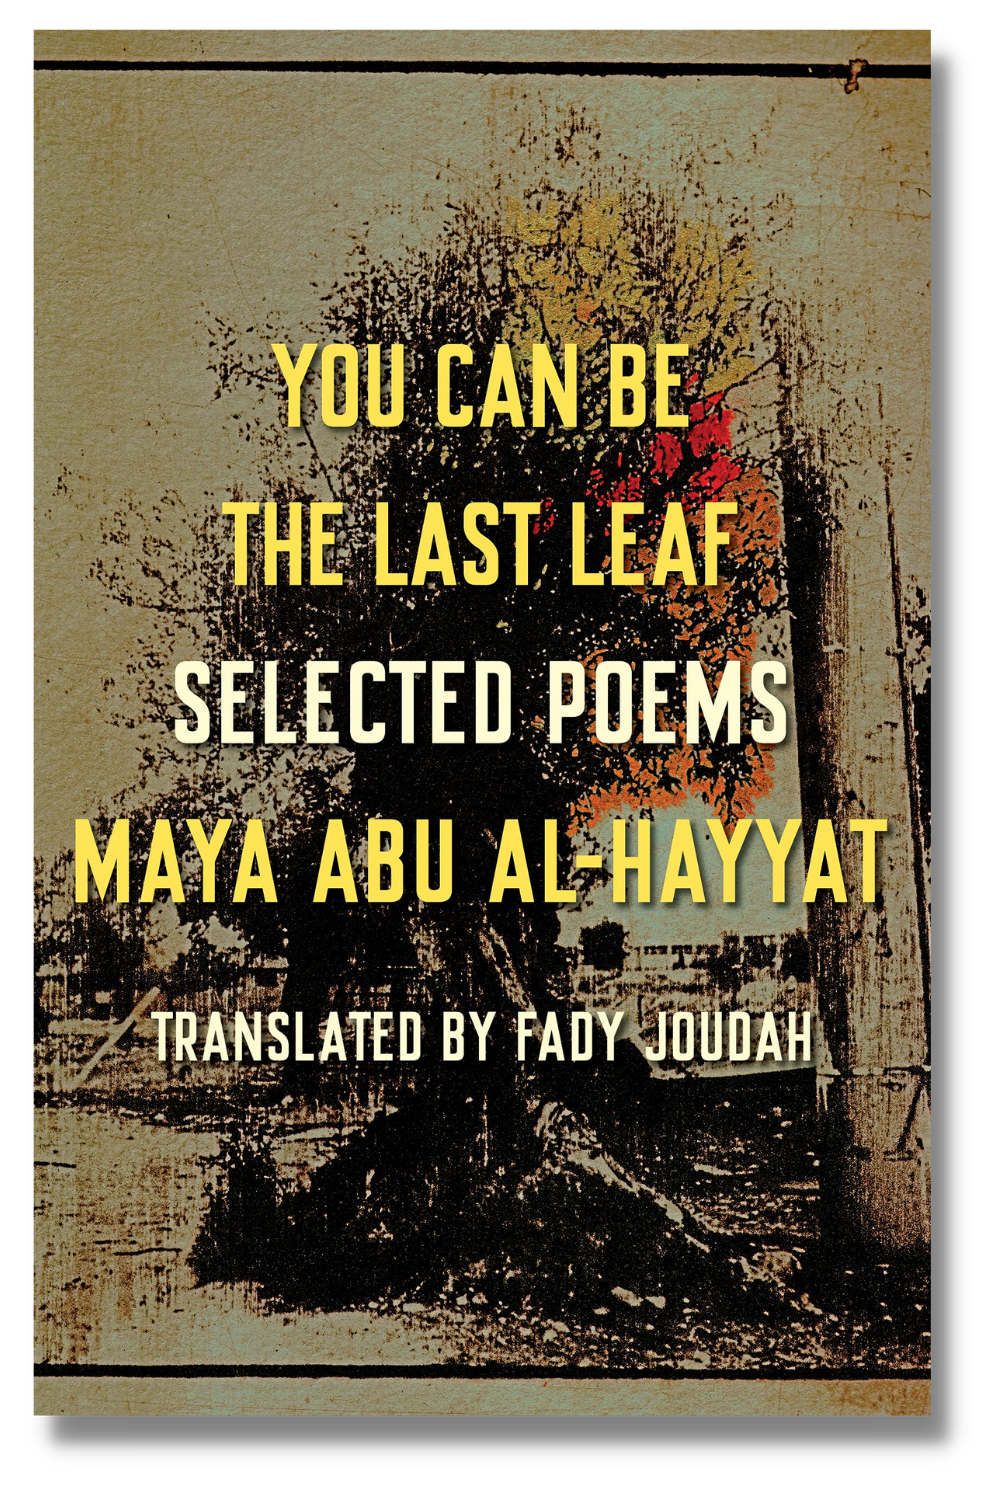 The cover of "You Can Be the Last Leaf"